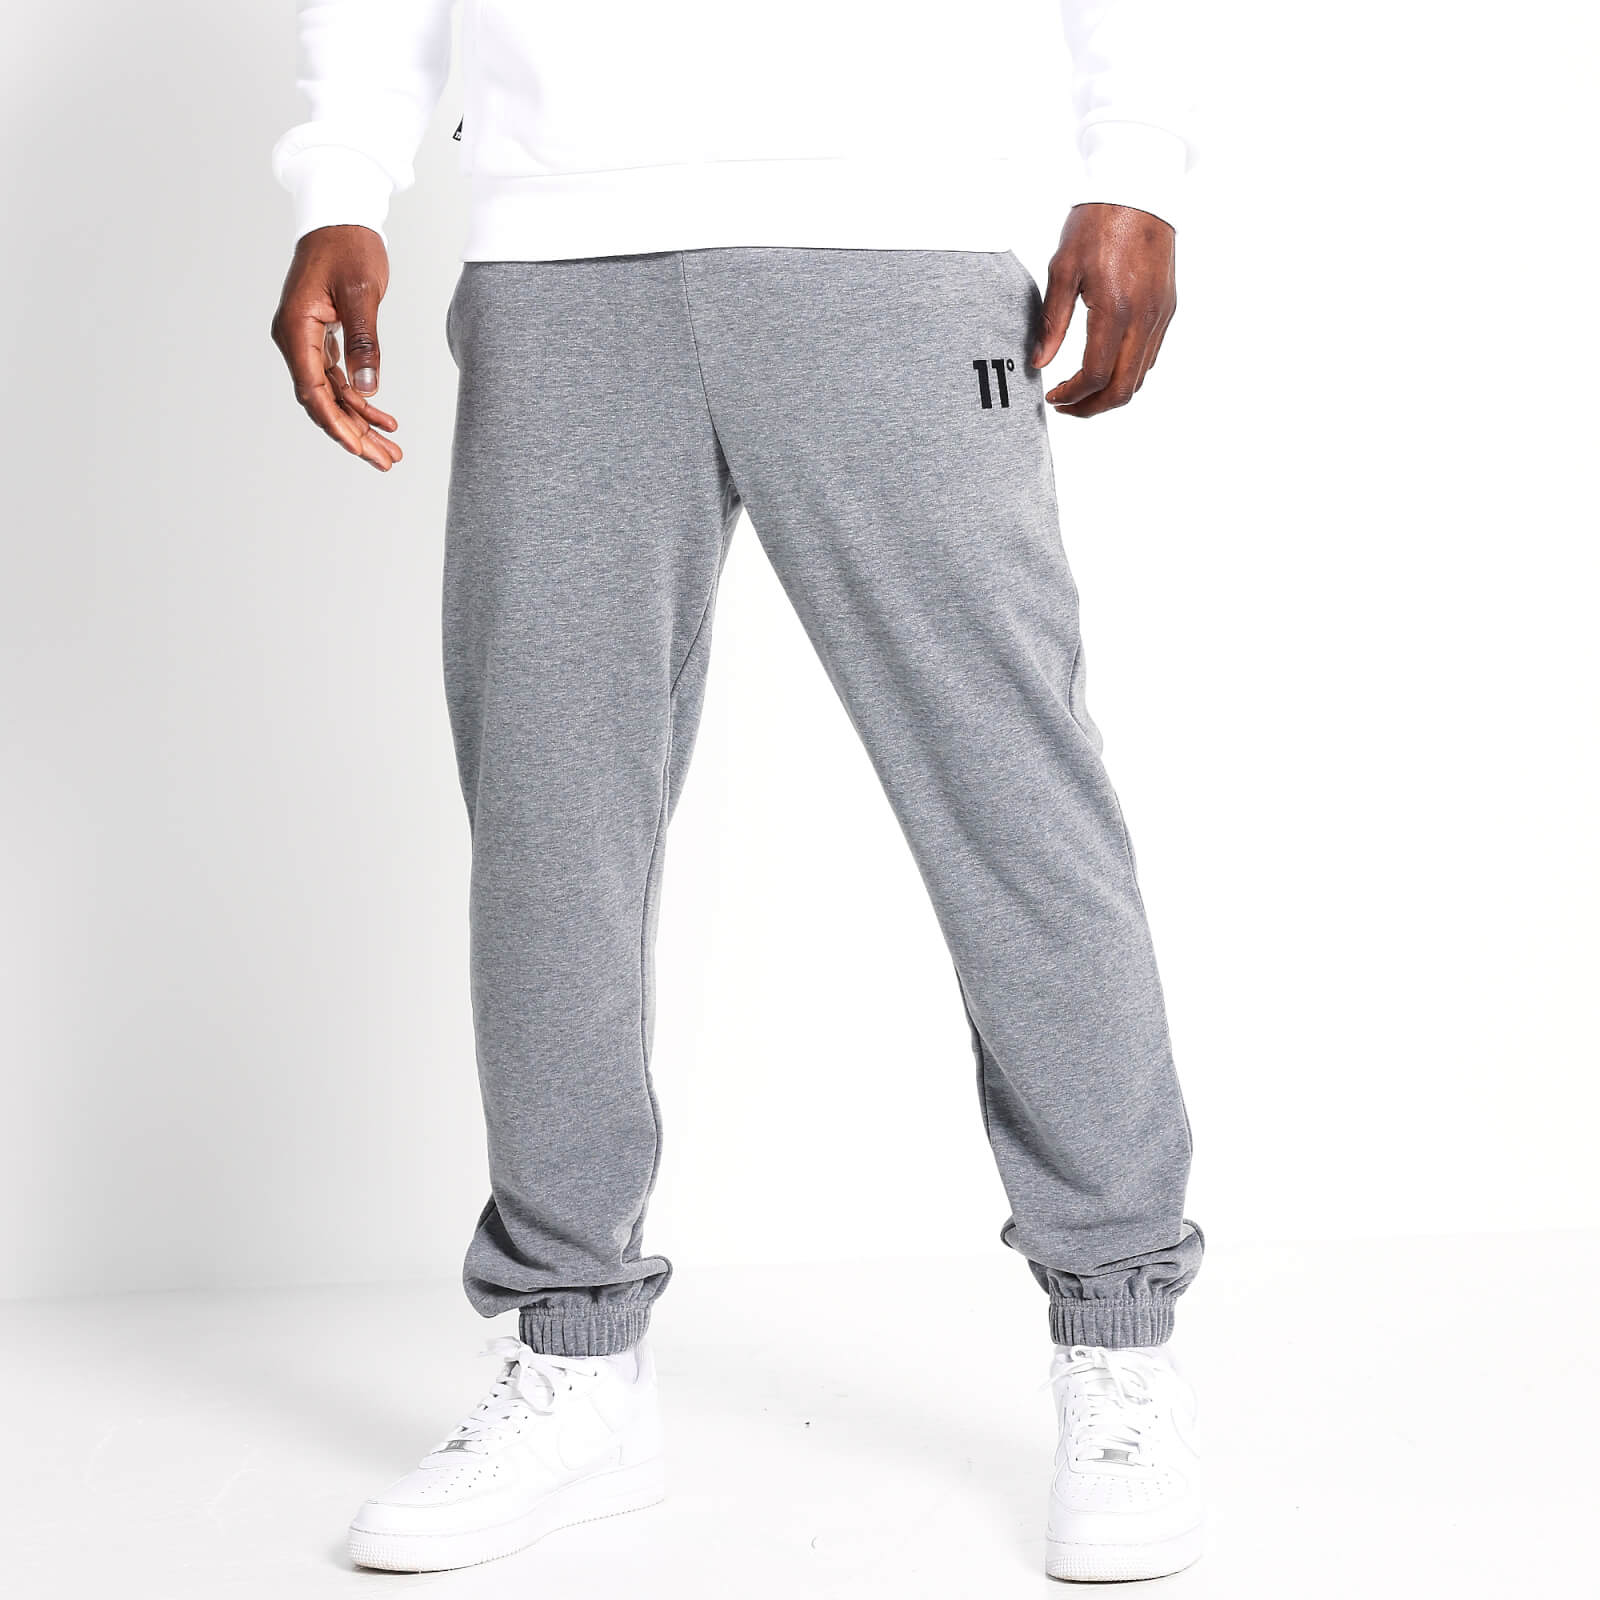 Buy Charcoal Grey Cuffed Joggers from the Next UK online shop